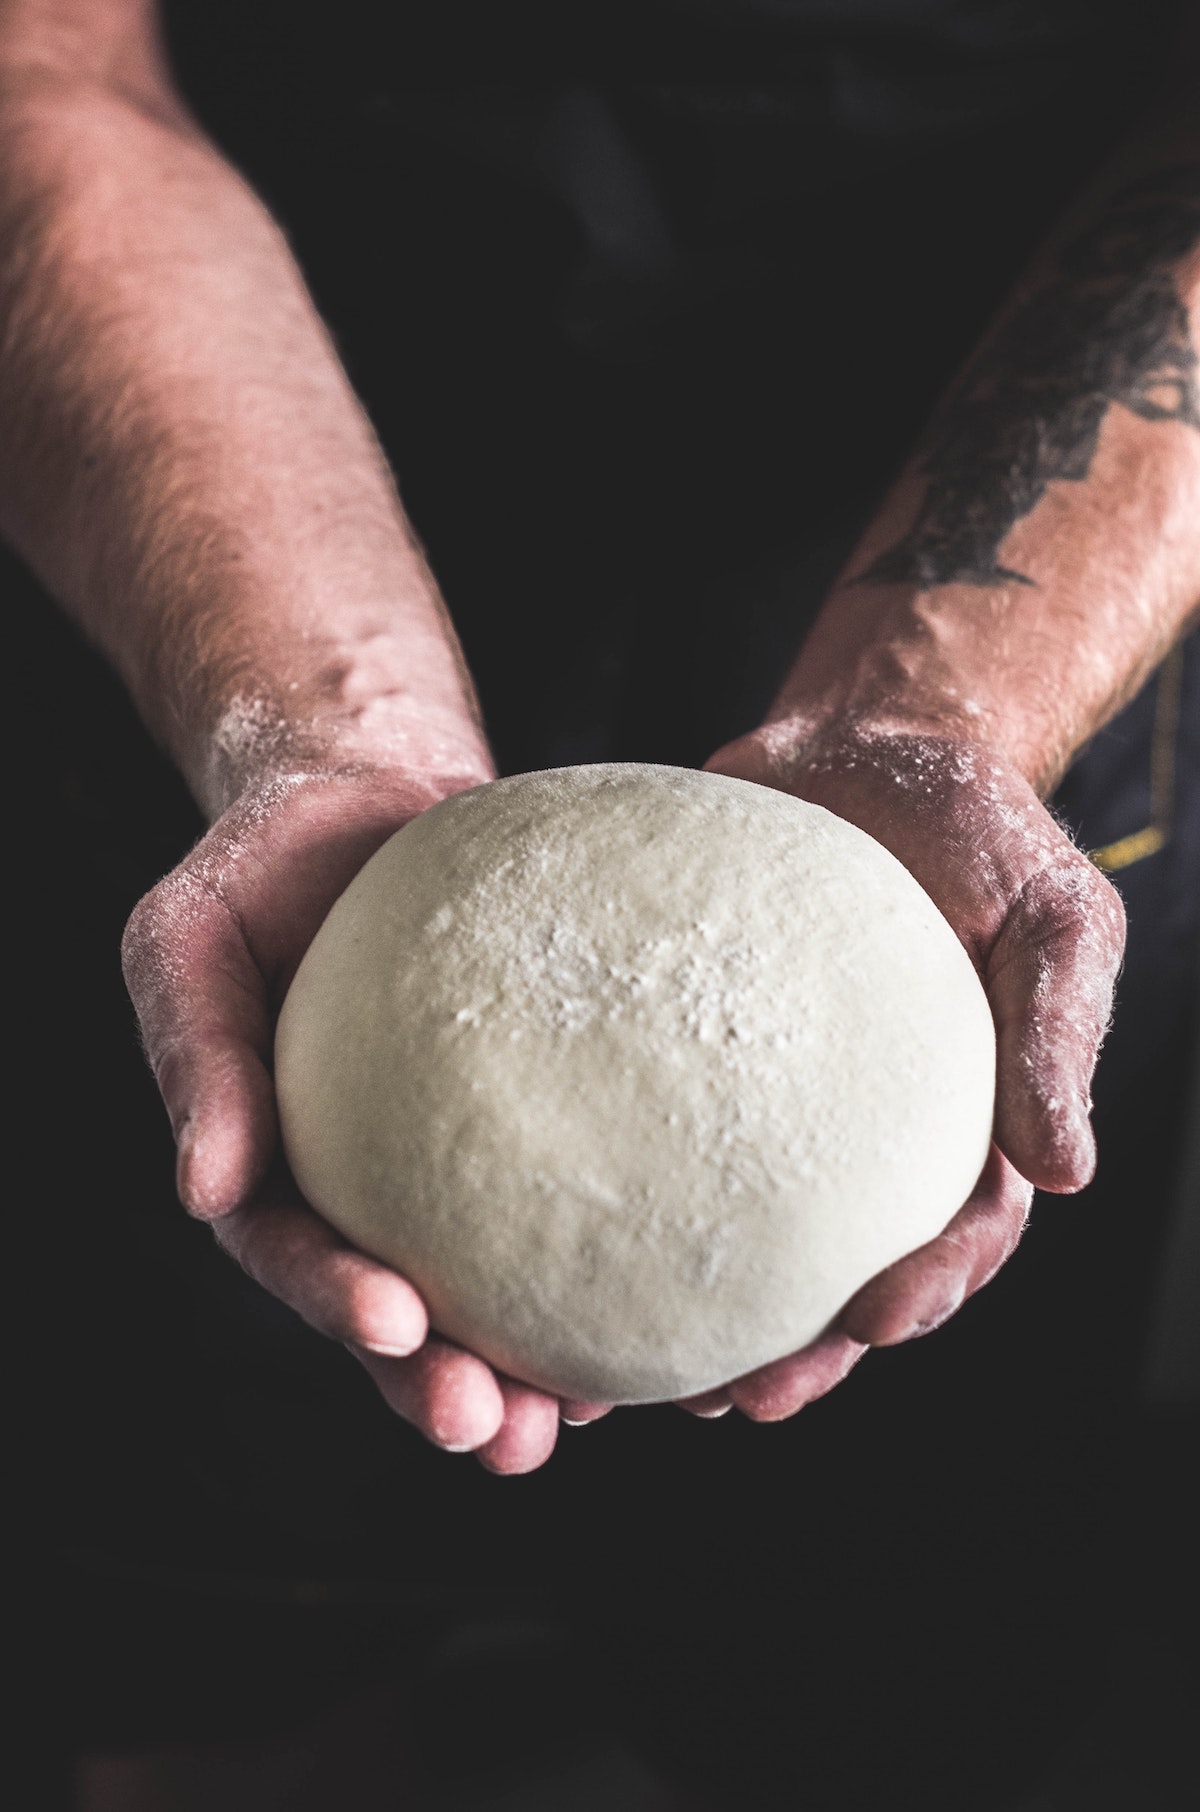 Person's hands holding a ball of pizza dough.